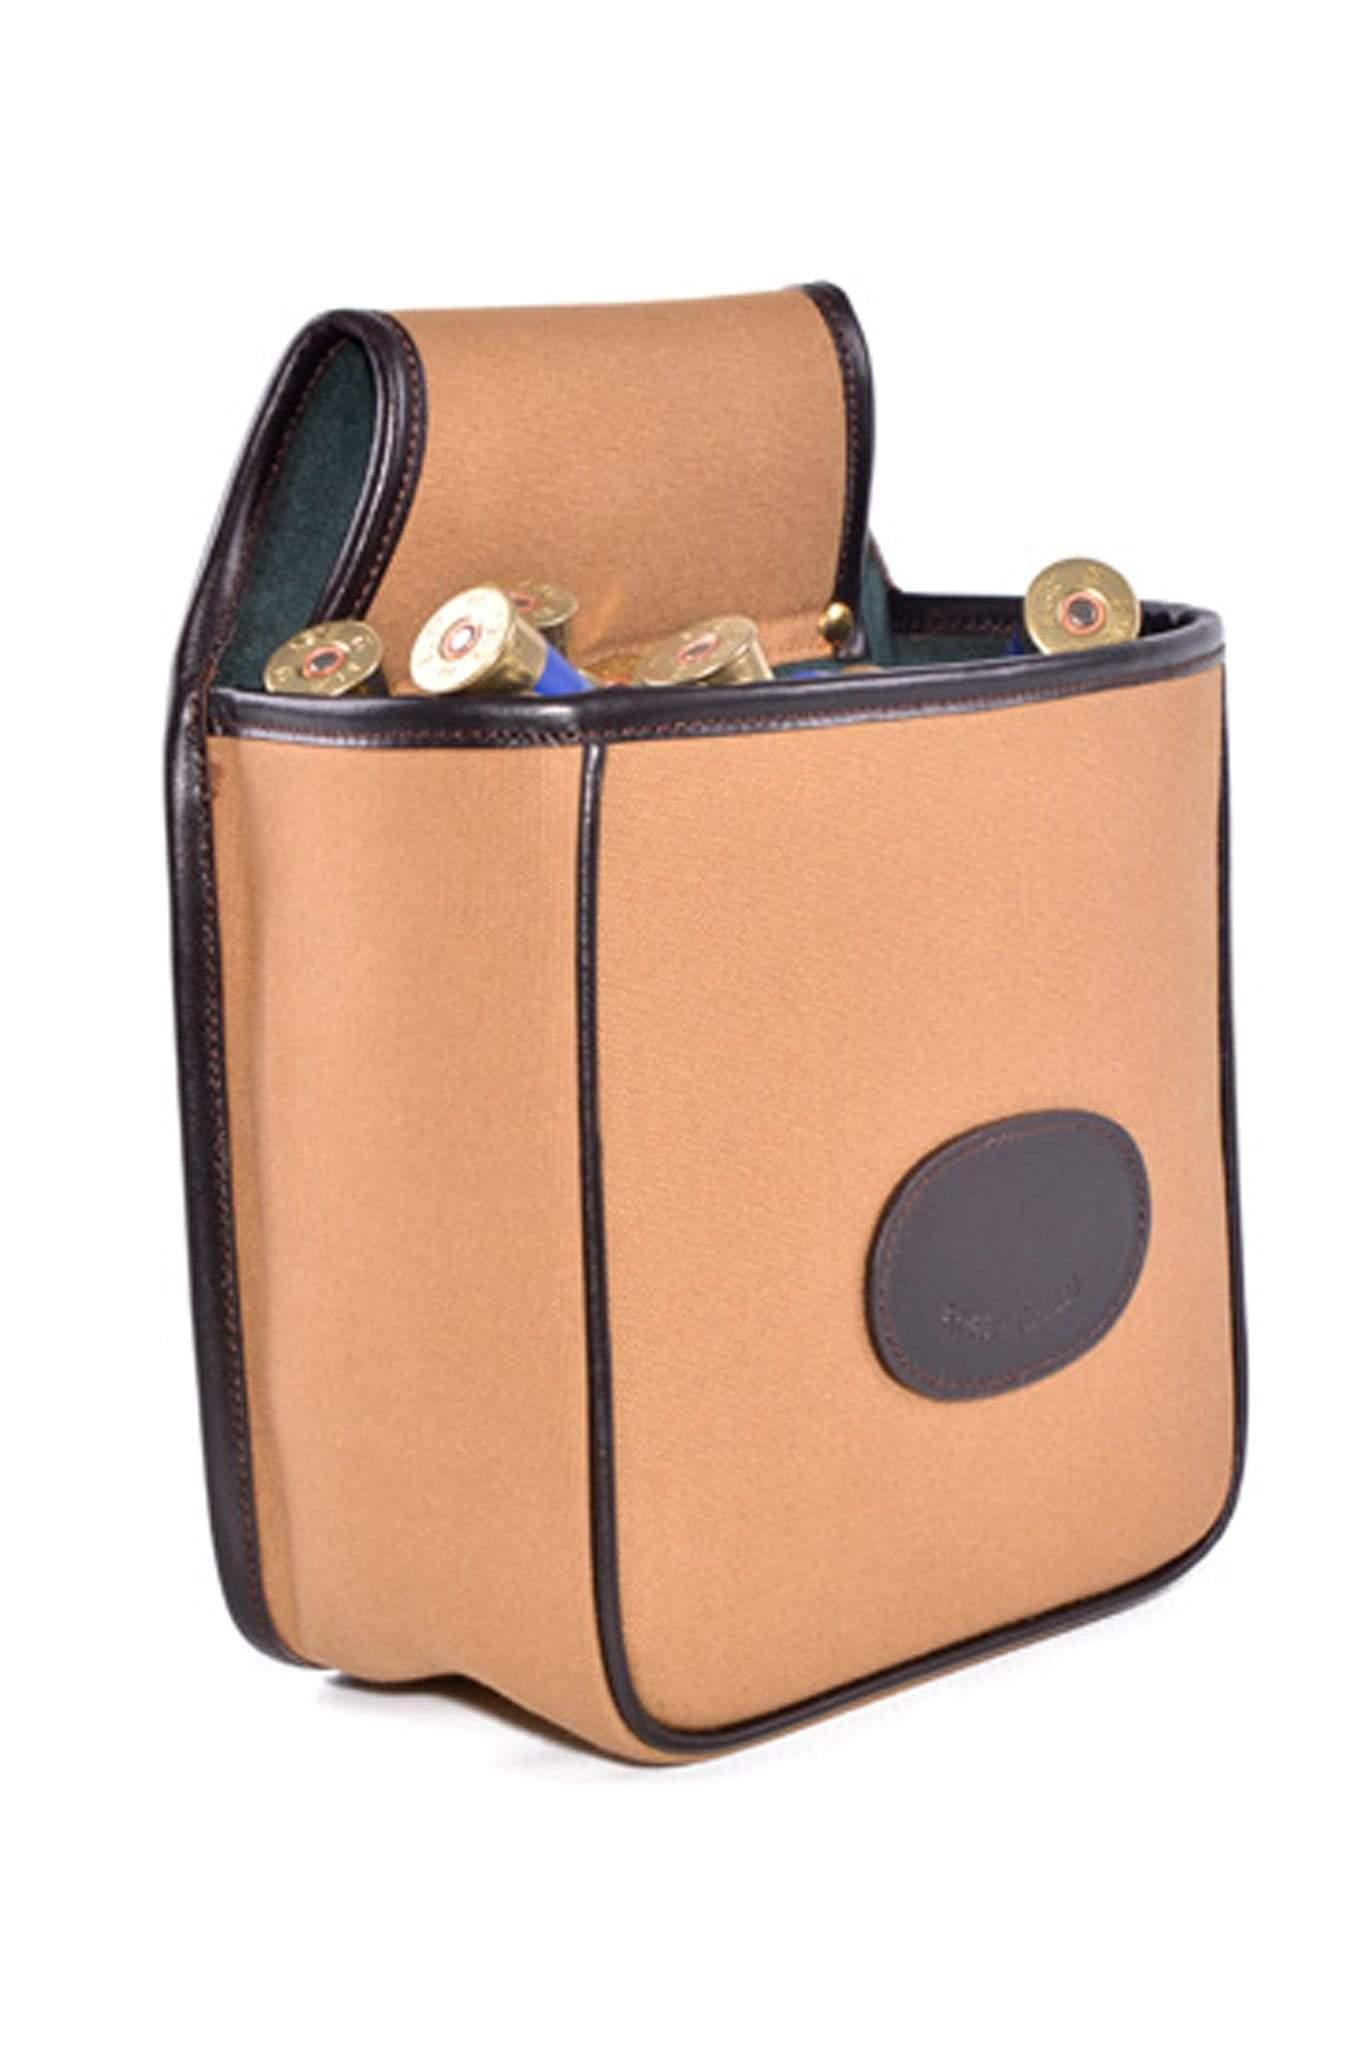 Robey & Green Gun Accessories Robey & Green Glebe Canvas and Leather Open Top Cartridge Bag (Pouch)